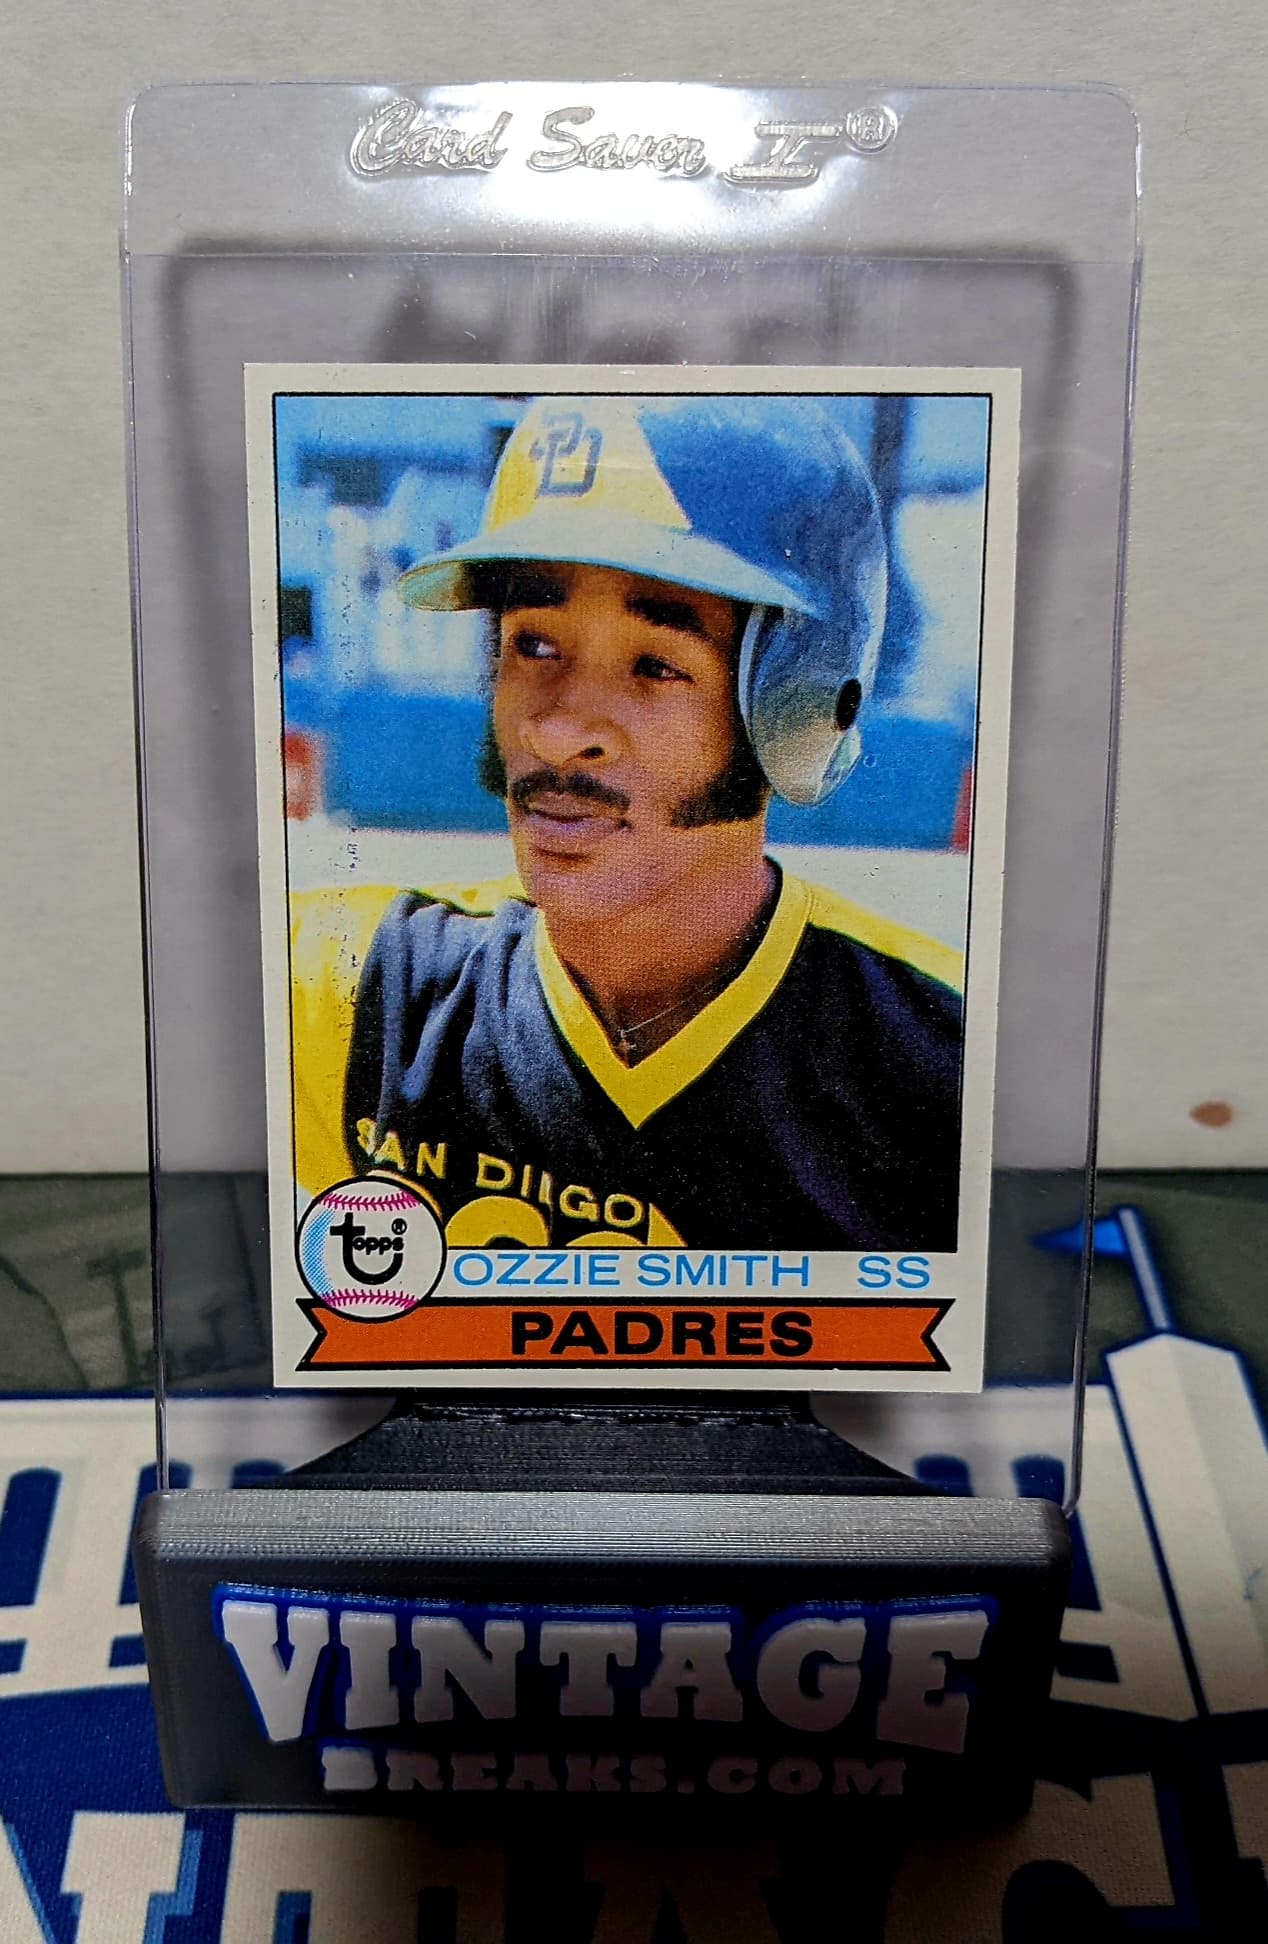 1979 Topps Ozzie Smith Rookie Card Pulled from Wax Pack